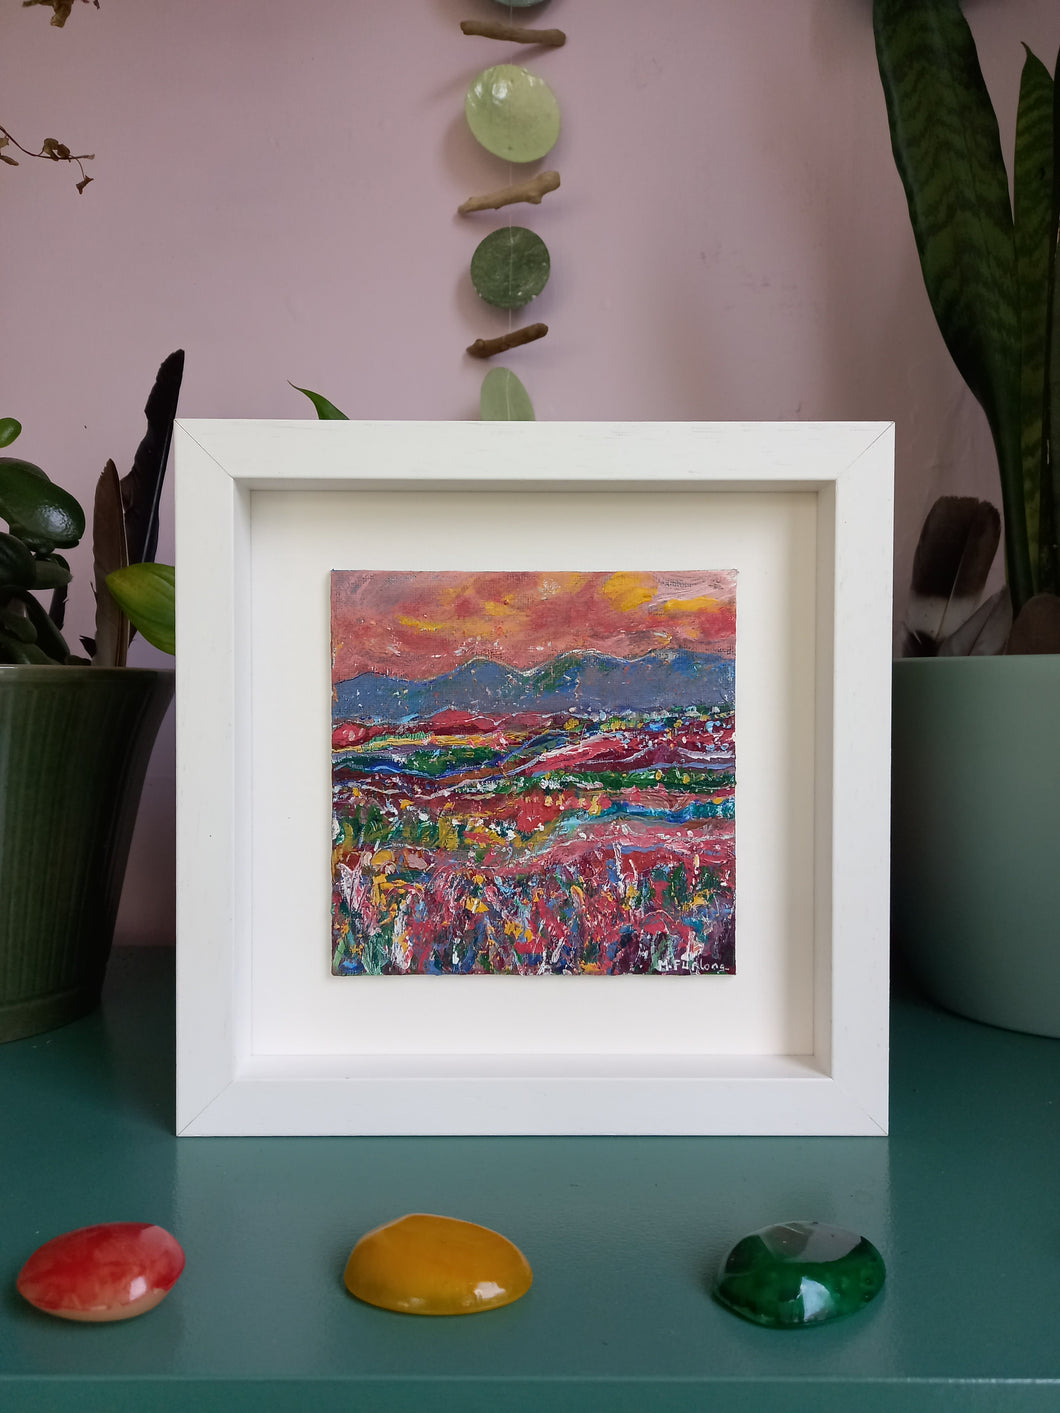 Under A Pink And Yellow Sky - original acrylic painting on wood (framed)